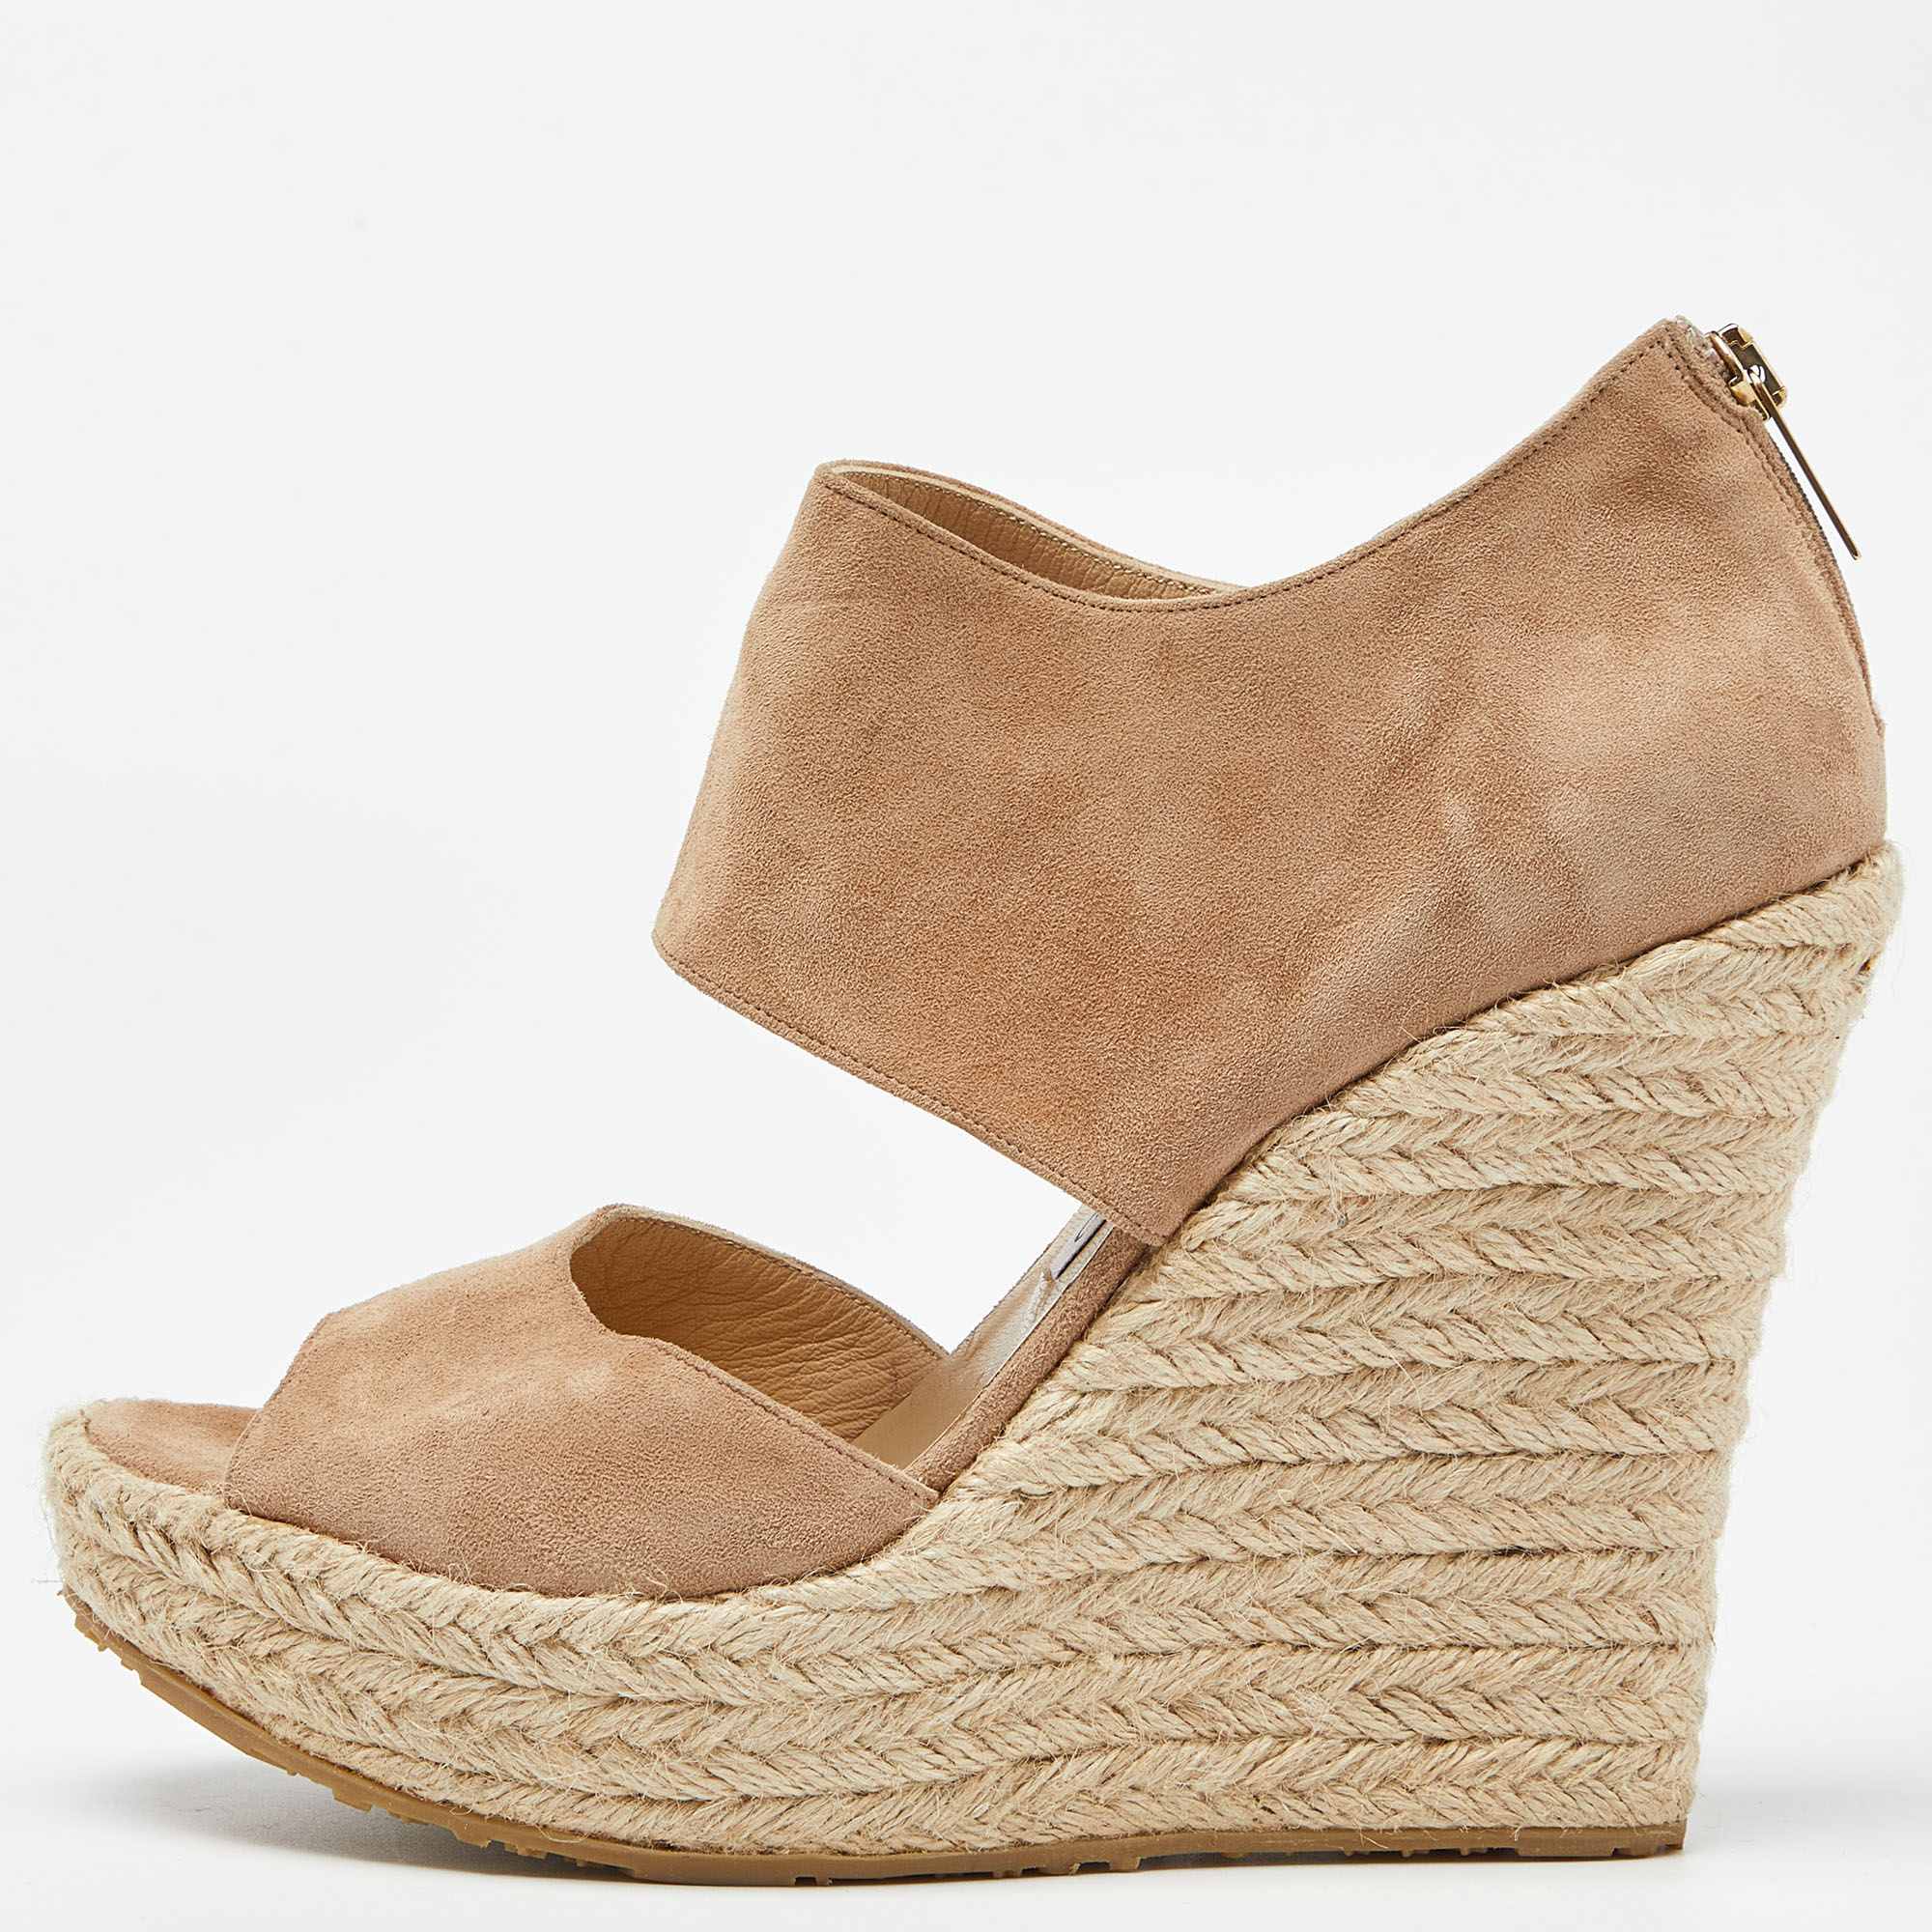 Jimmy choo beige suede wedge espadrille ankle strap sandals size 38.5